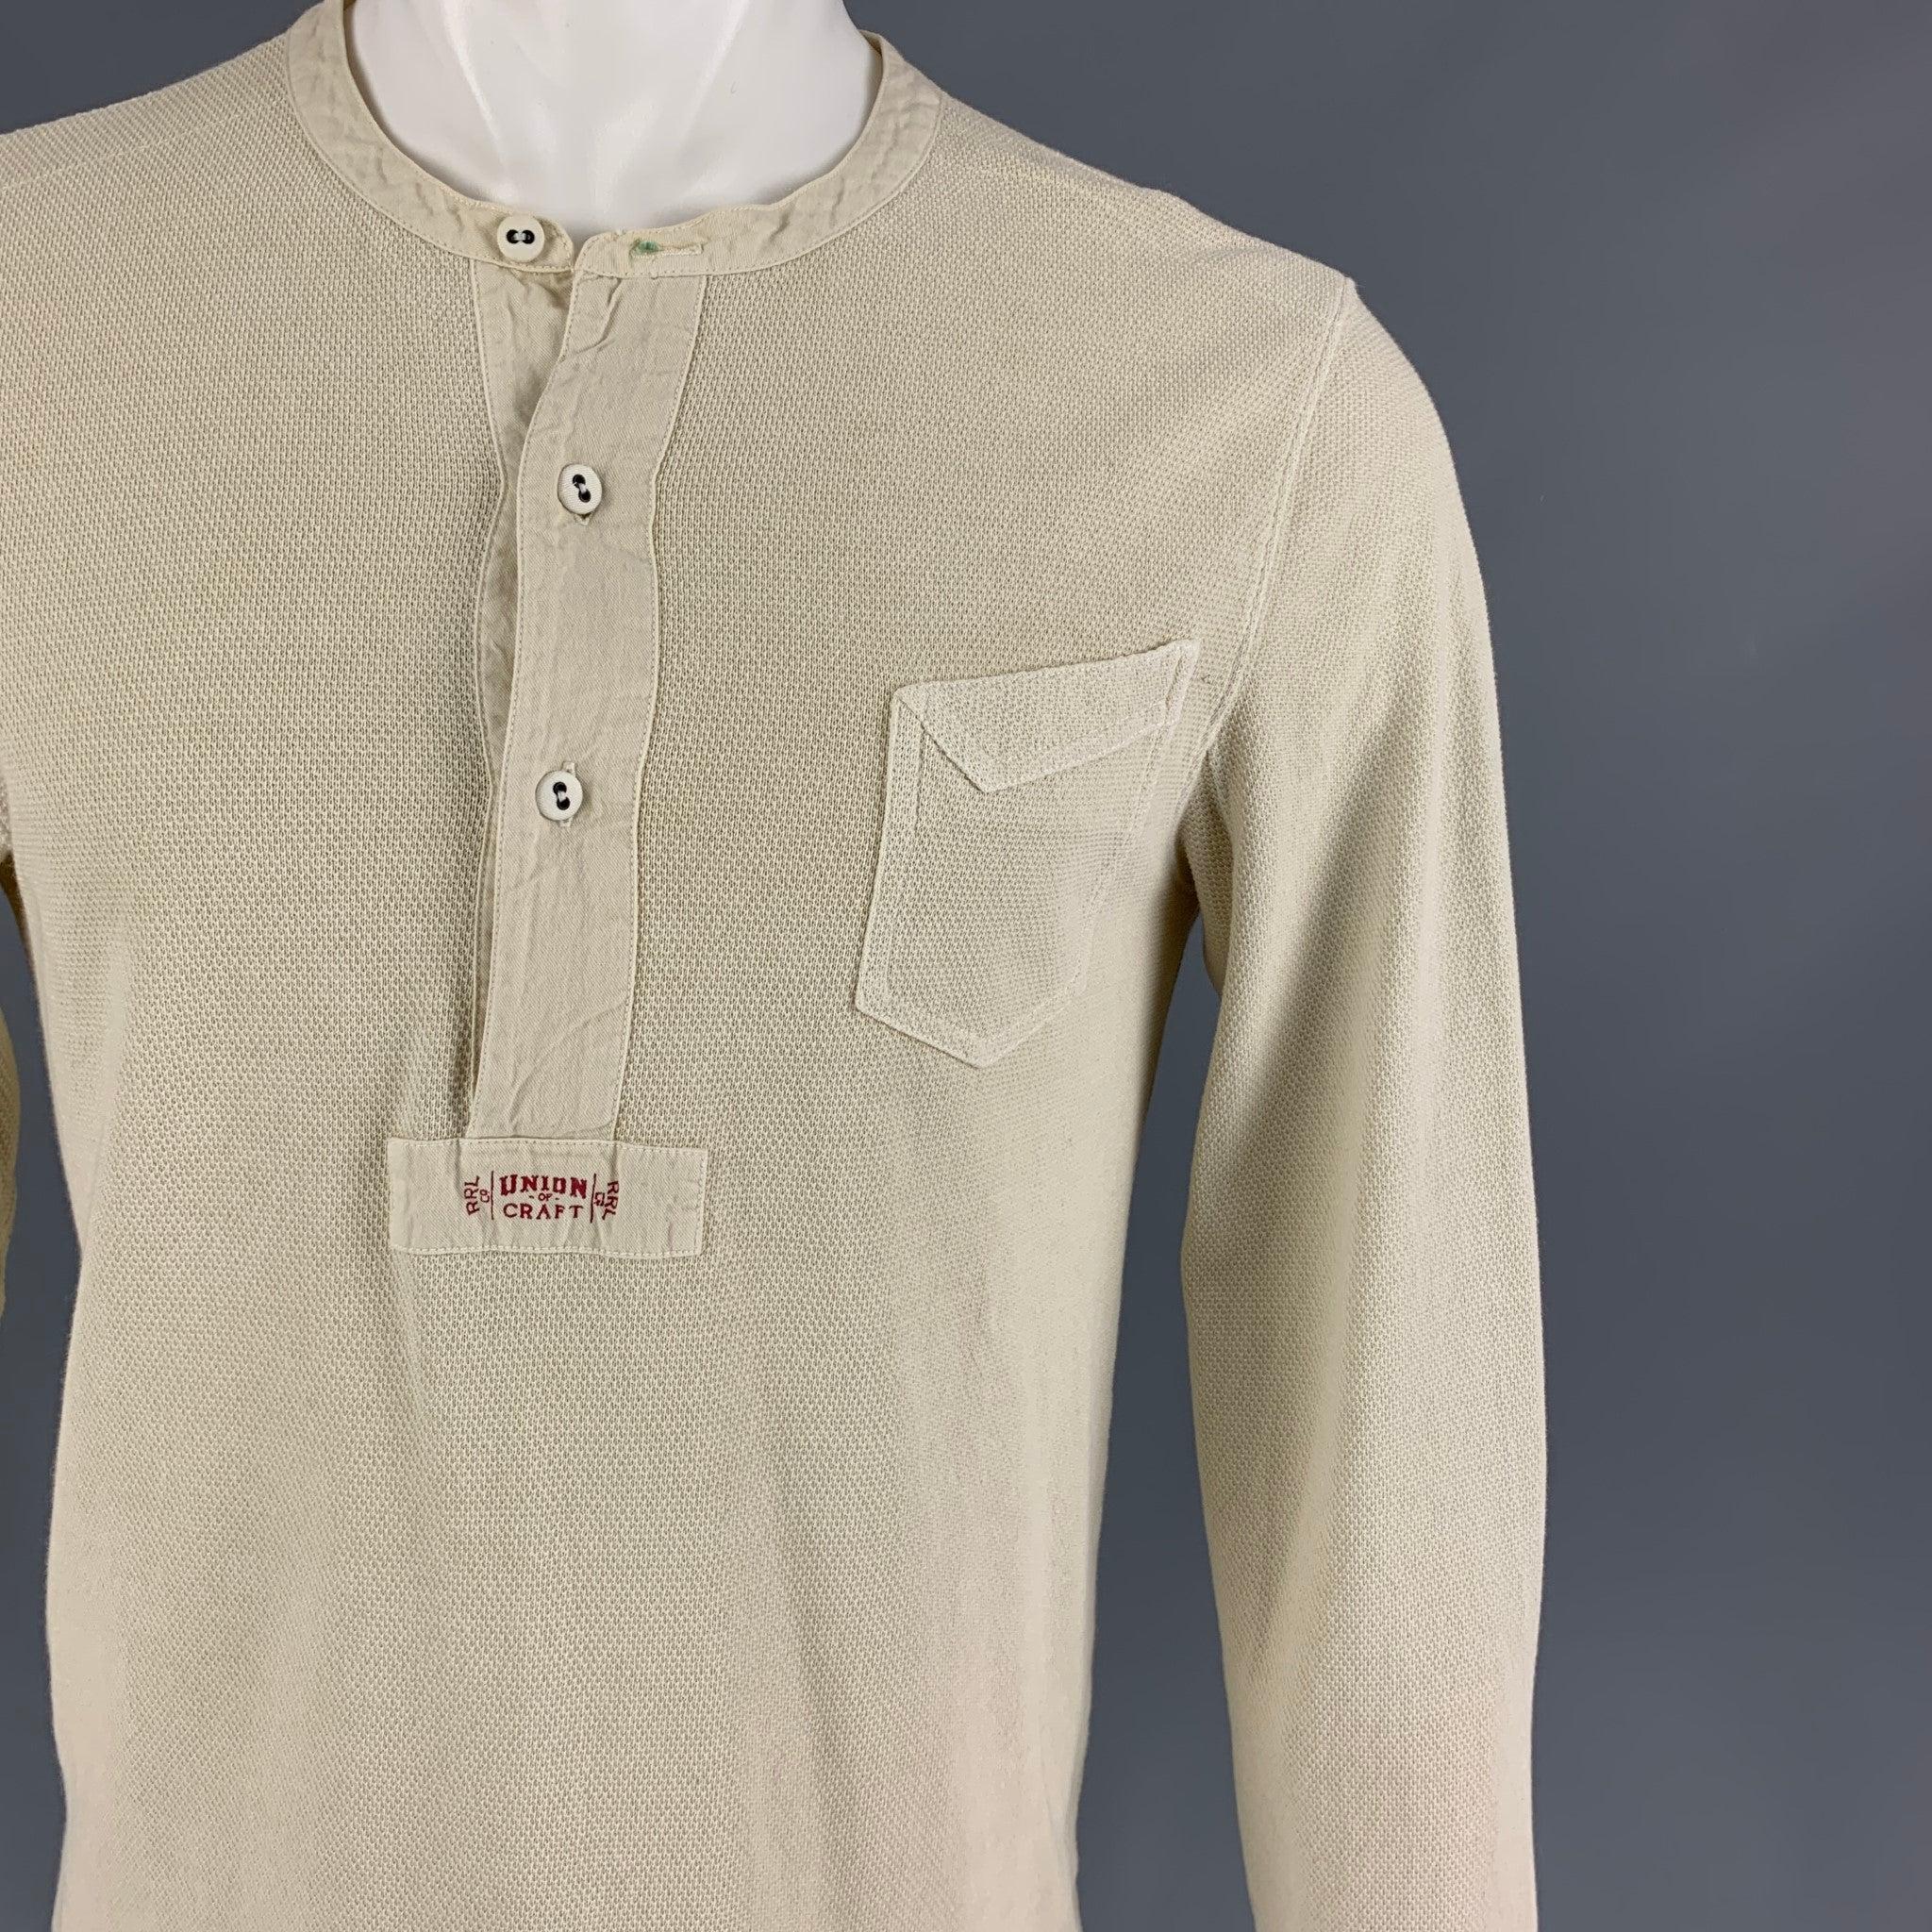 RRL by RALPH LAUREN long sleeve shirt comes in a beige textured cotton featuring a henley style, front small patch pocket, and a buttoned closure.
Good
Pre-Owned Condition. Minor discoloration at sleeve. As-is.  

Marked:   S 

Measurements: 
